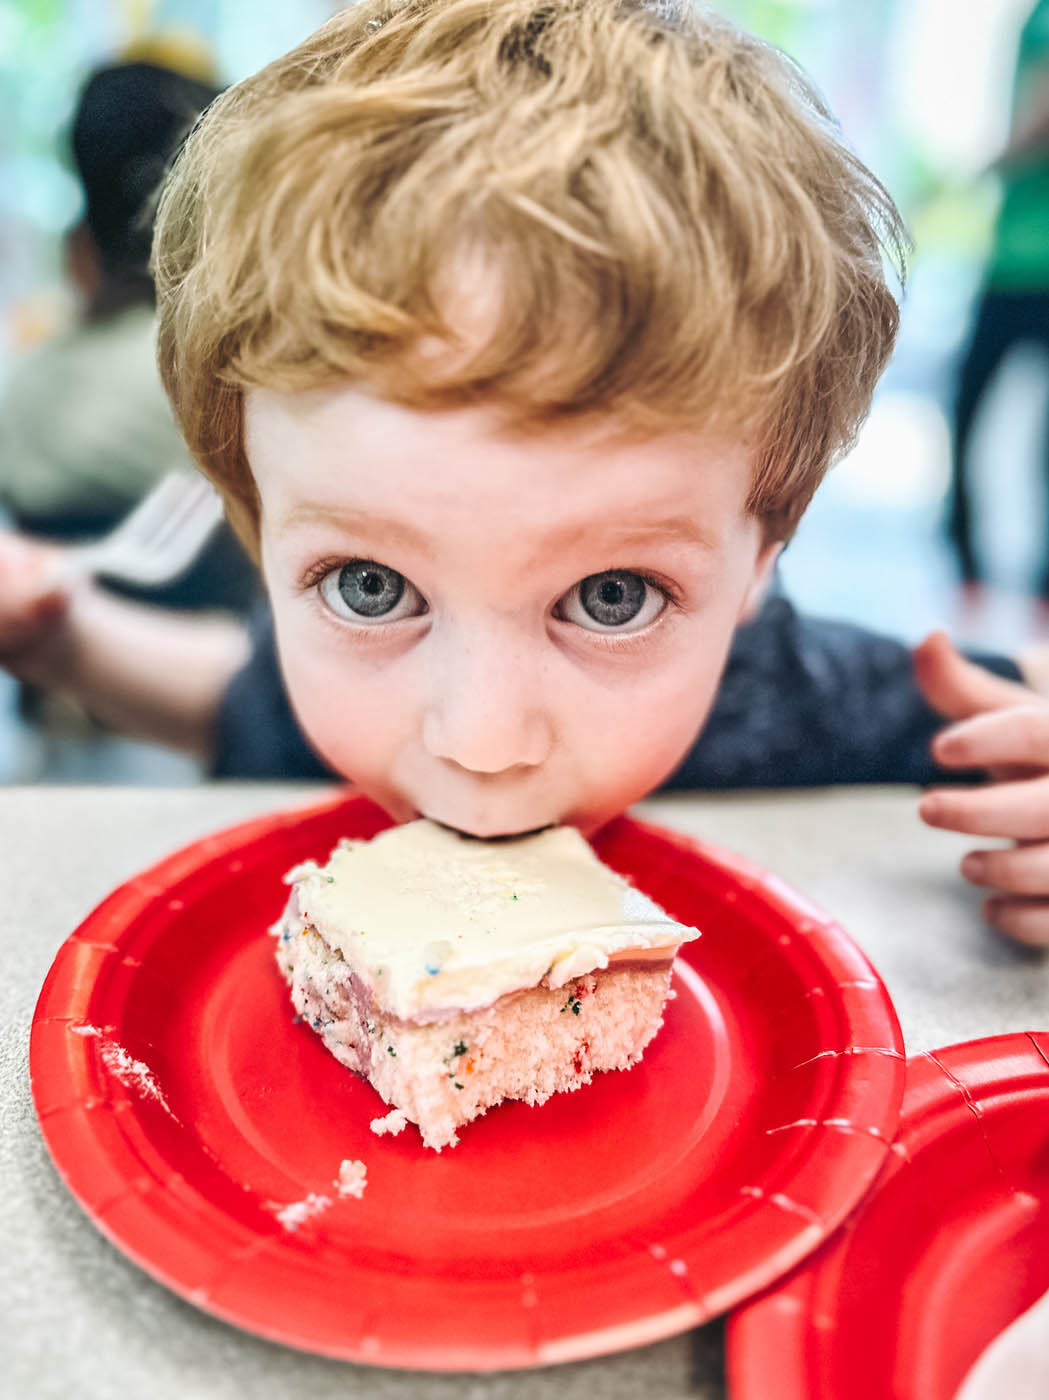 A kid taking a big bite out of a cake piece at Romp n' Roll - a children's party place.